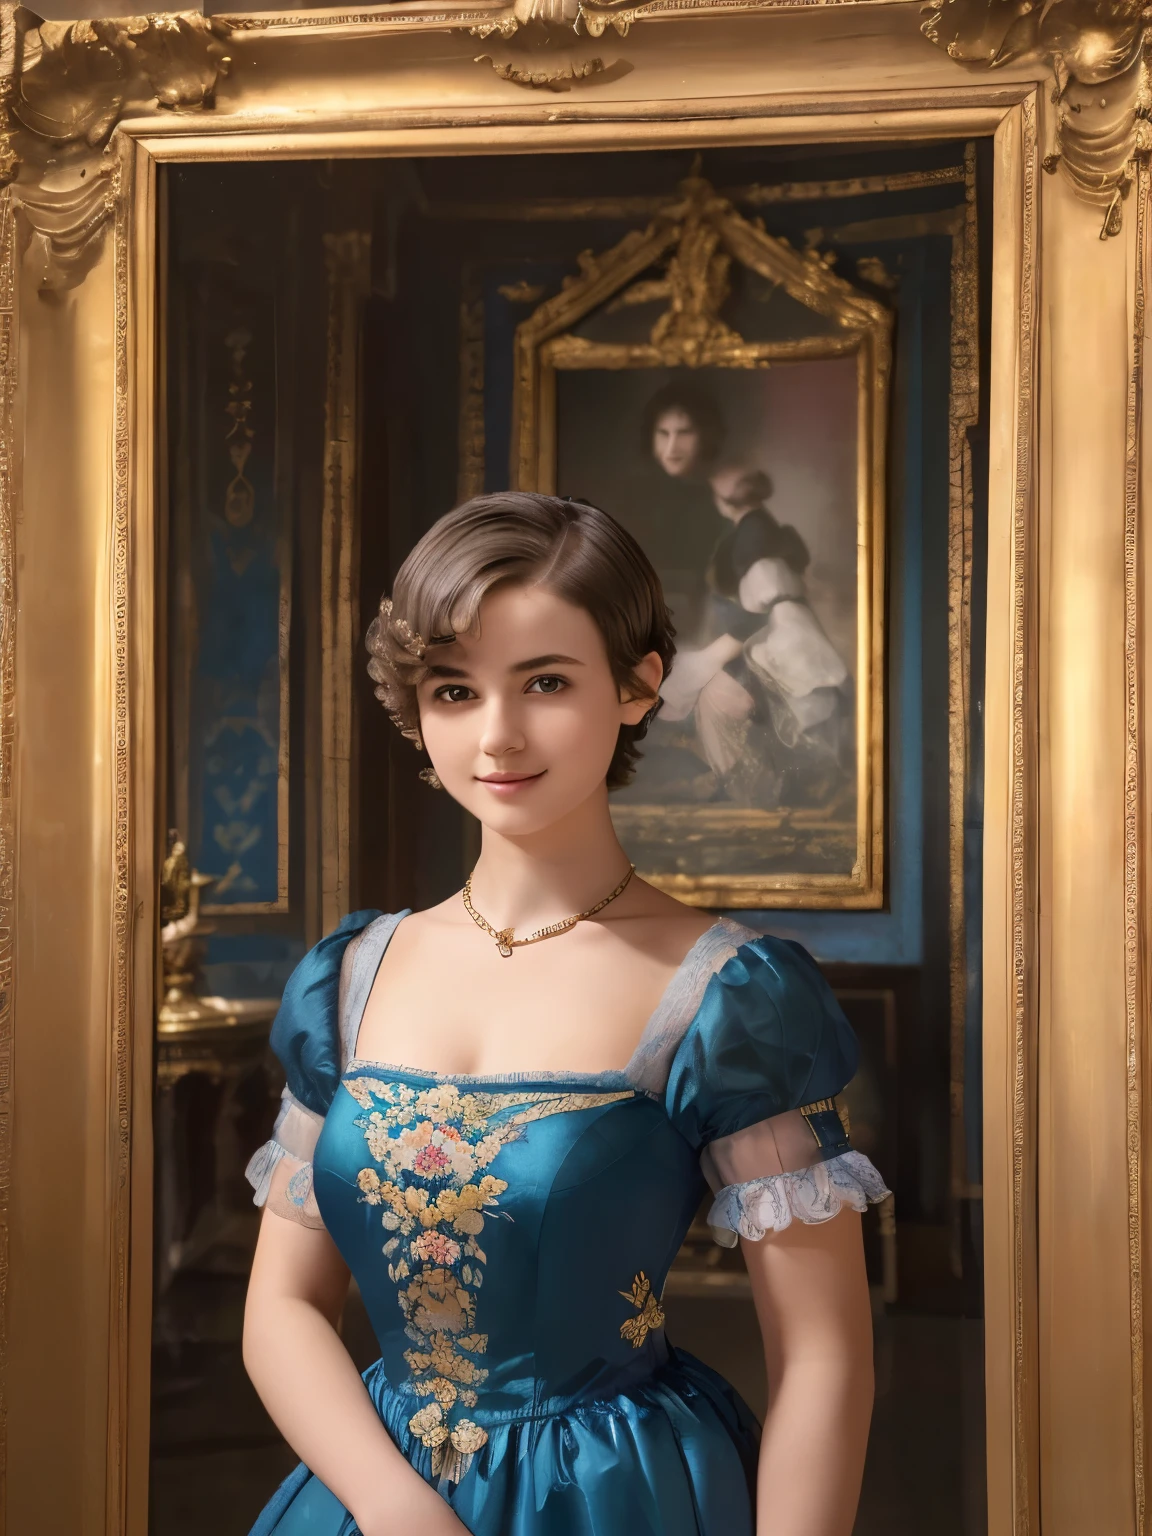 142
(a 20 yo woman,in the palace), (A hyper-realistic), (high-level image quality), ((beautiful hairstyle 46)), ((short-hair:1.46)), (kindly smile), (breasted:1.1), (lipsticks), (wearing a blue dress), (murky,wide,Luxurious room), (florals), (an oil painting、Rembrandt)